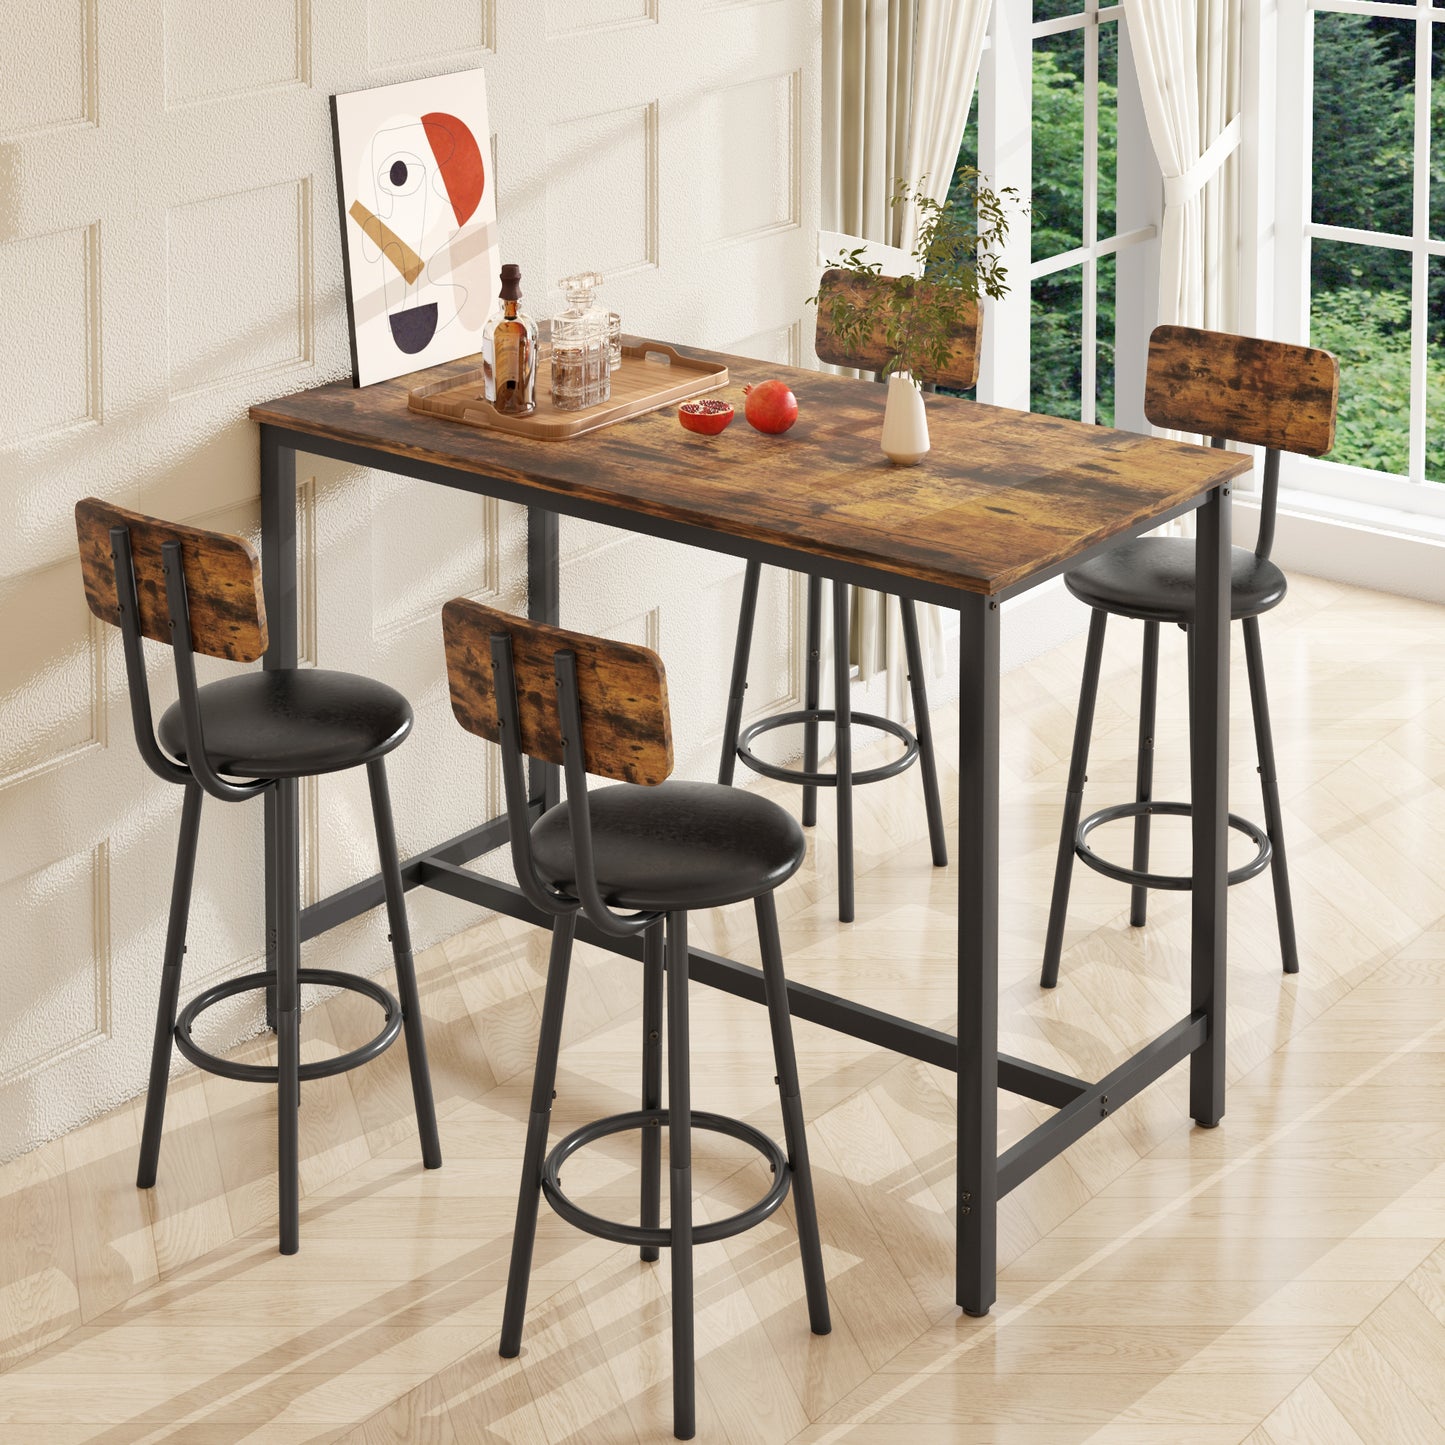 Modern Bar Table Set, Kitchen Table and Chairs for 4, 5 Piece Counter Height Dining Set with 4 Cushioned Stools, Extra Long Bistro Pub Table Set, Breakfast Dining Table Set, Rustic Brown